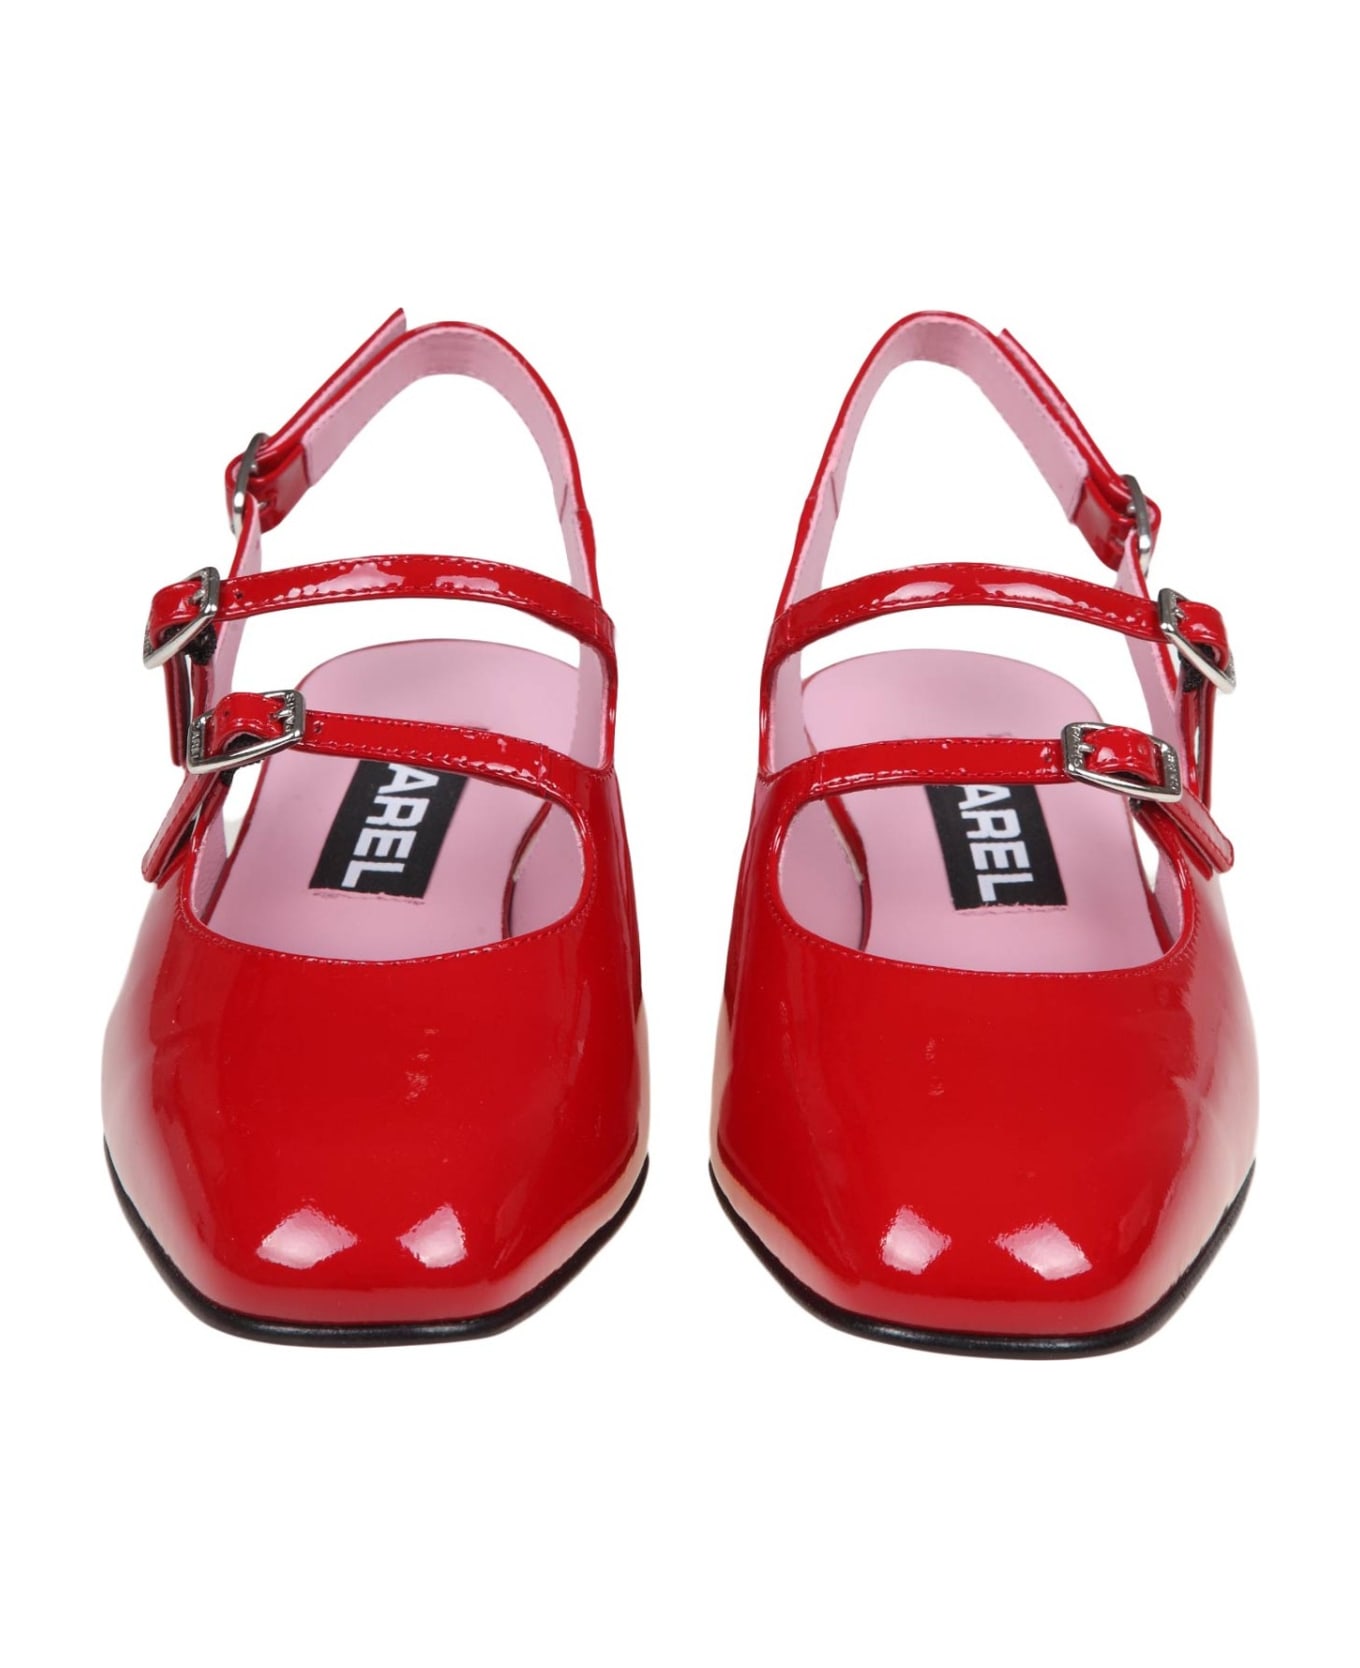 Carel Slingback In Red Patent Leather - Red